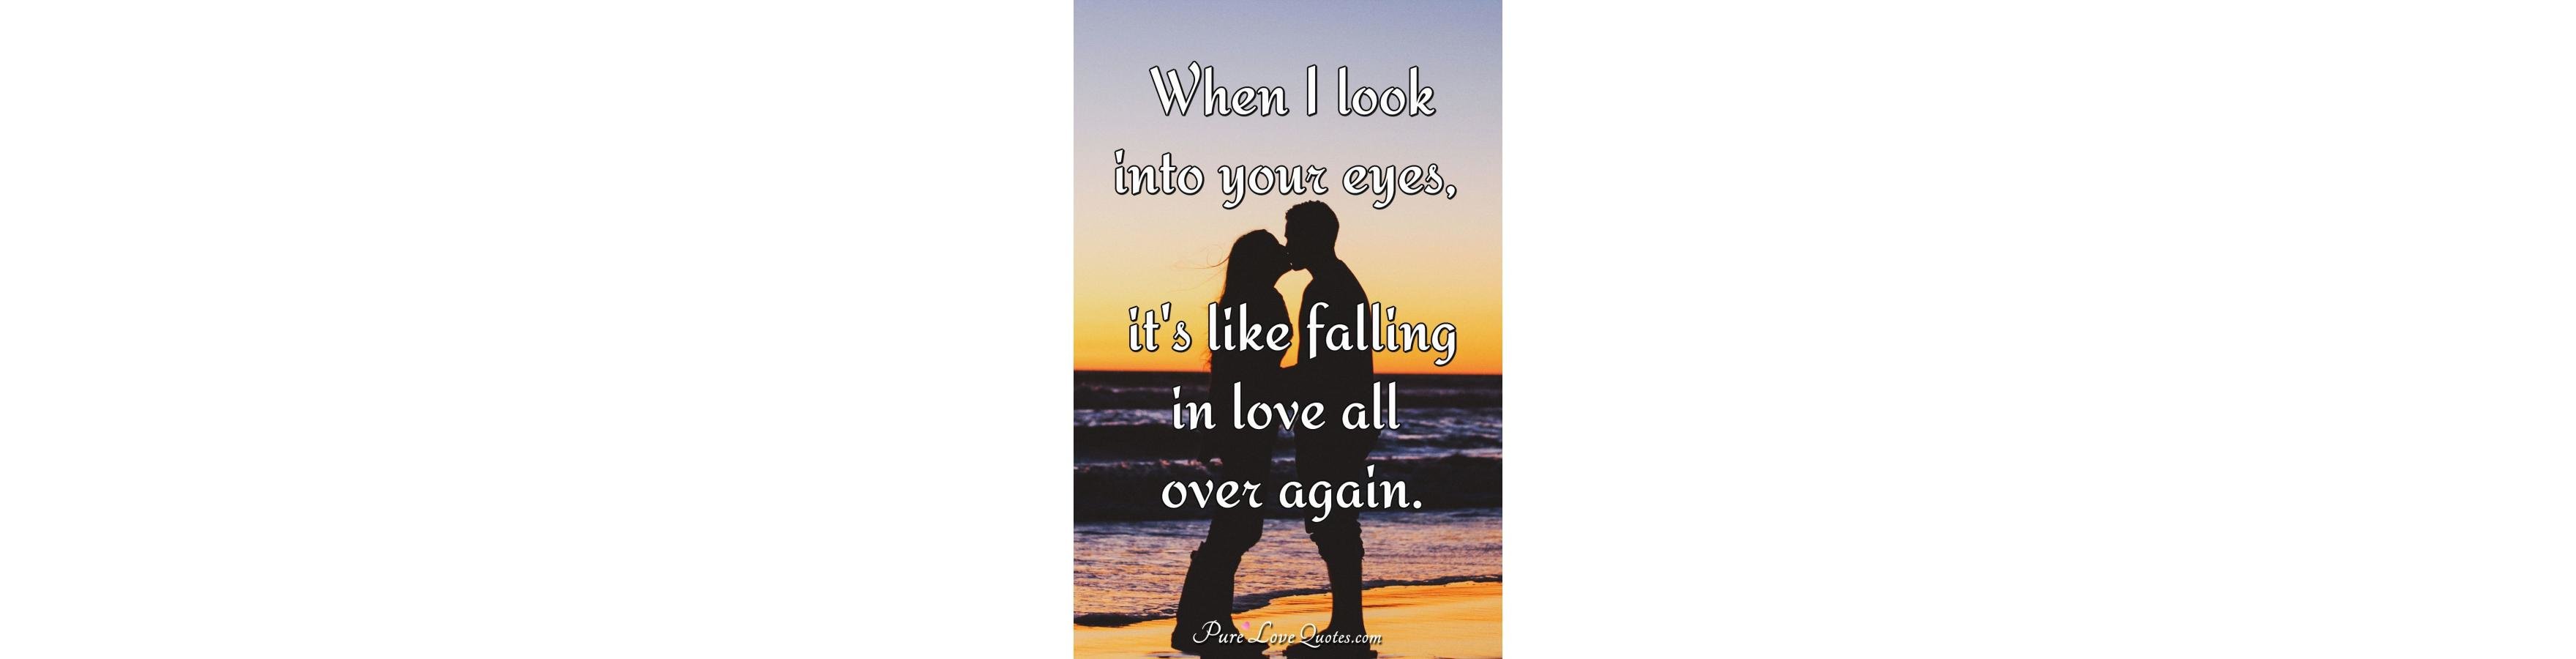 When I look into your eyes, it's like falling in love all over again. | PureLoveQuotes3520 x 900